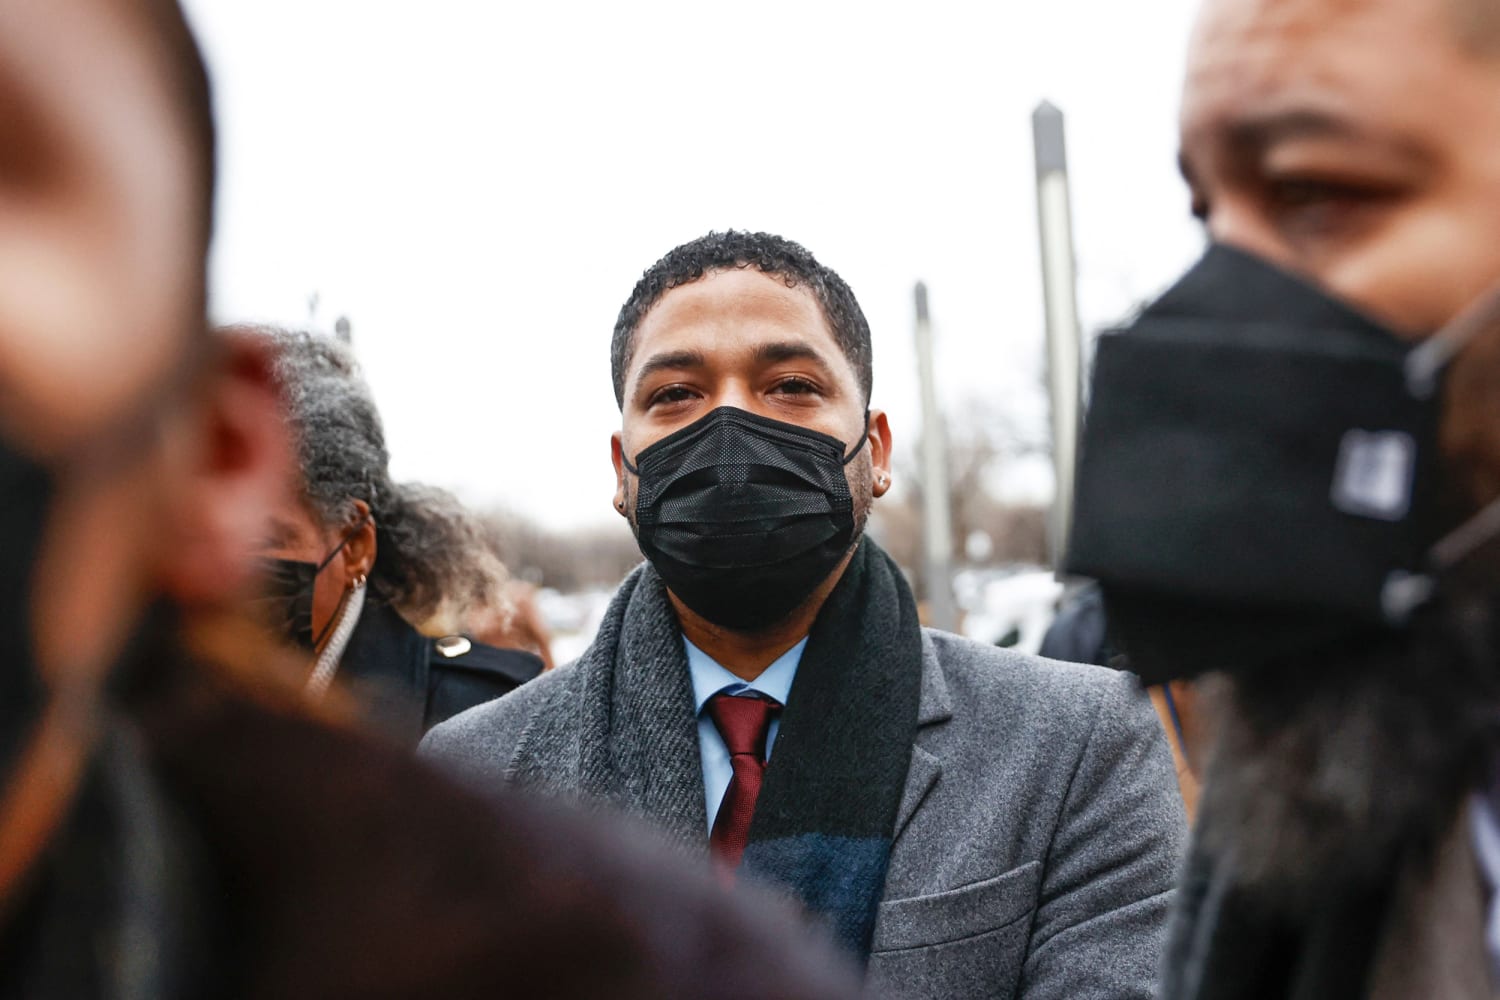 ‘There was no hoax’: Jussie Smollett denies attack was staged during testimony